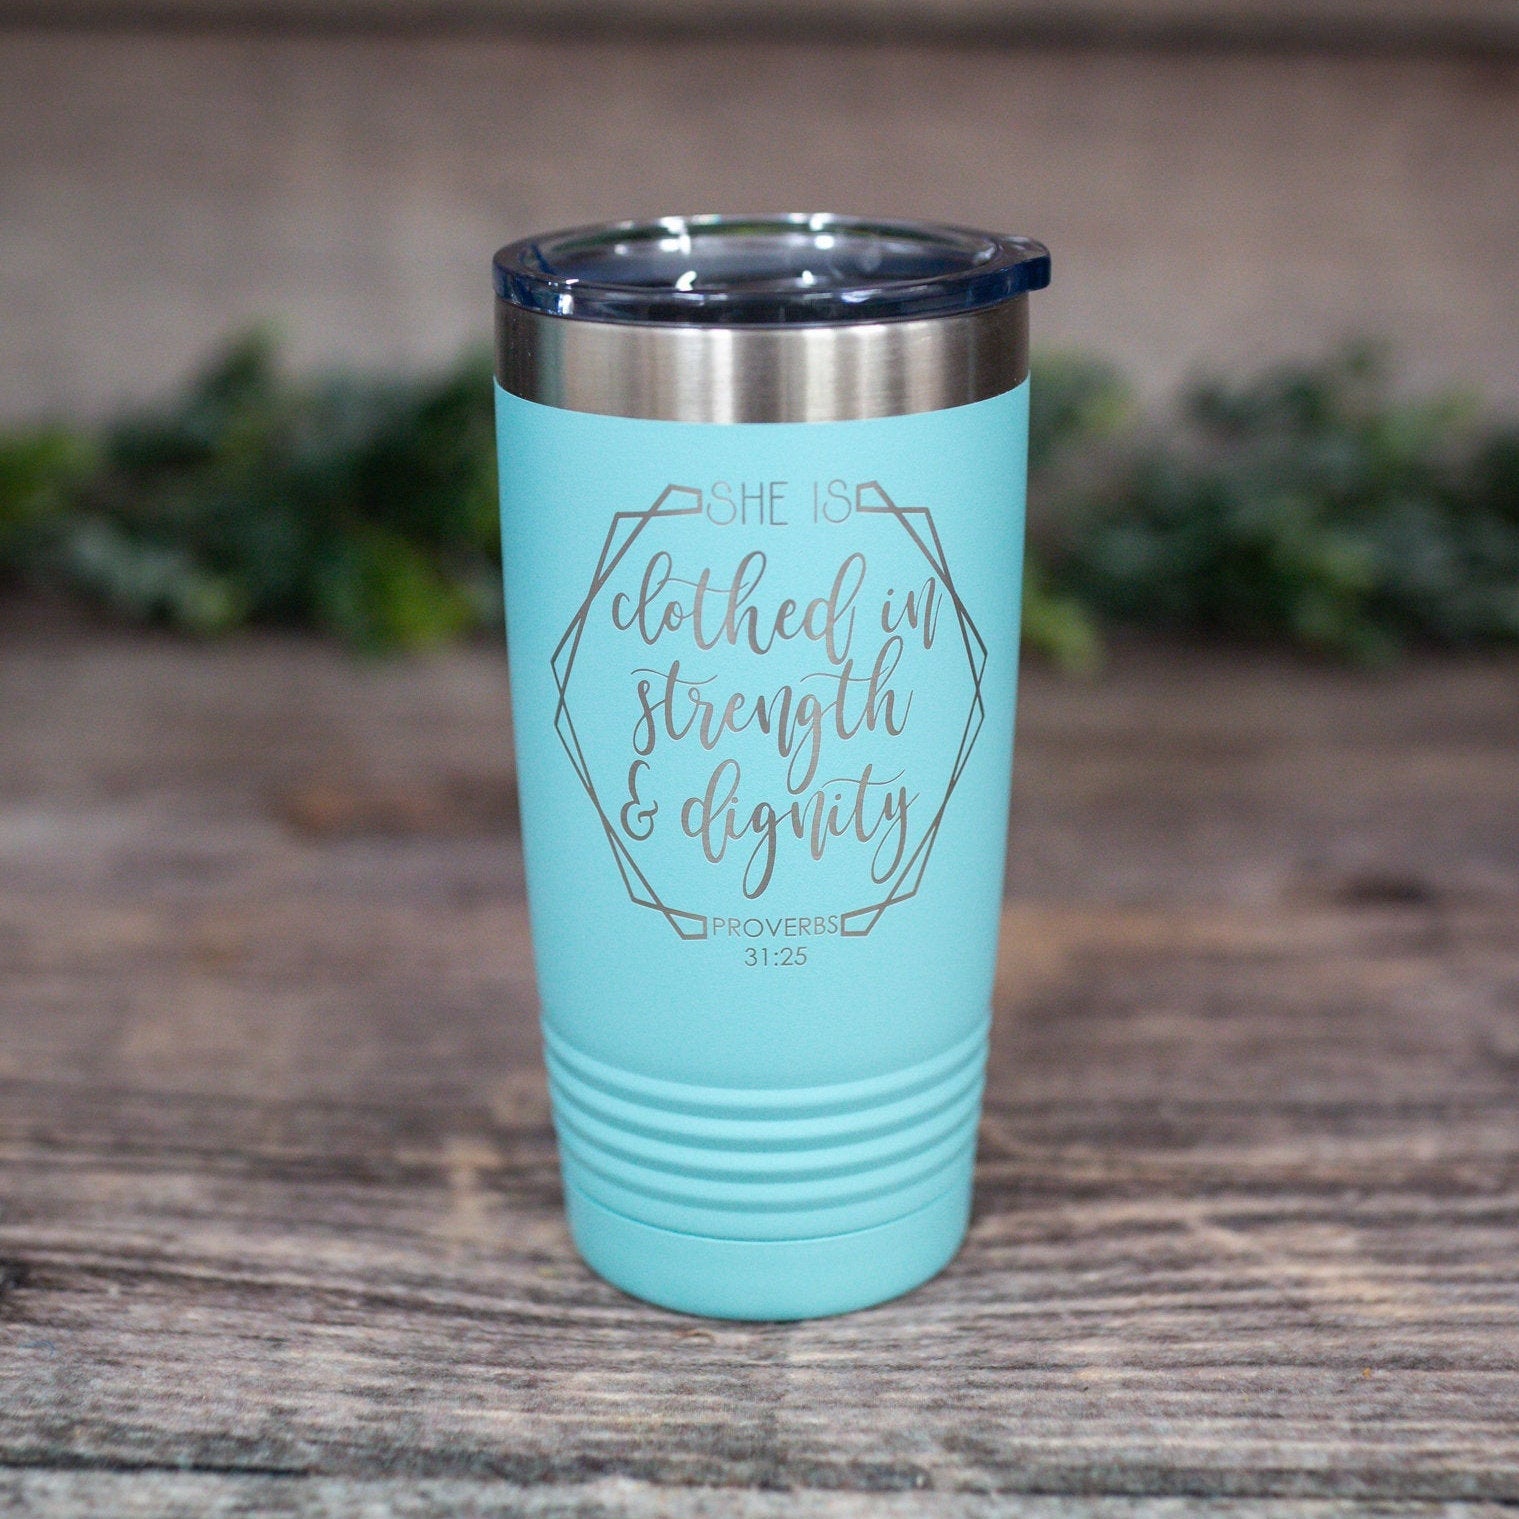 https://3cetching.com/wp-content/uploads/2021/07/she-is-clothed-in-strength-and-dignity-engraved-stainless-steel-tumbler-religious-gift-christian-gift-tumbler-60f77e92.jpg